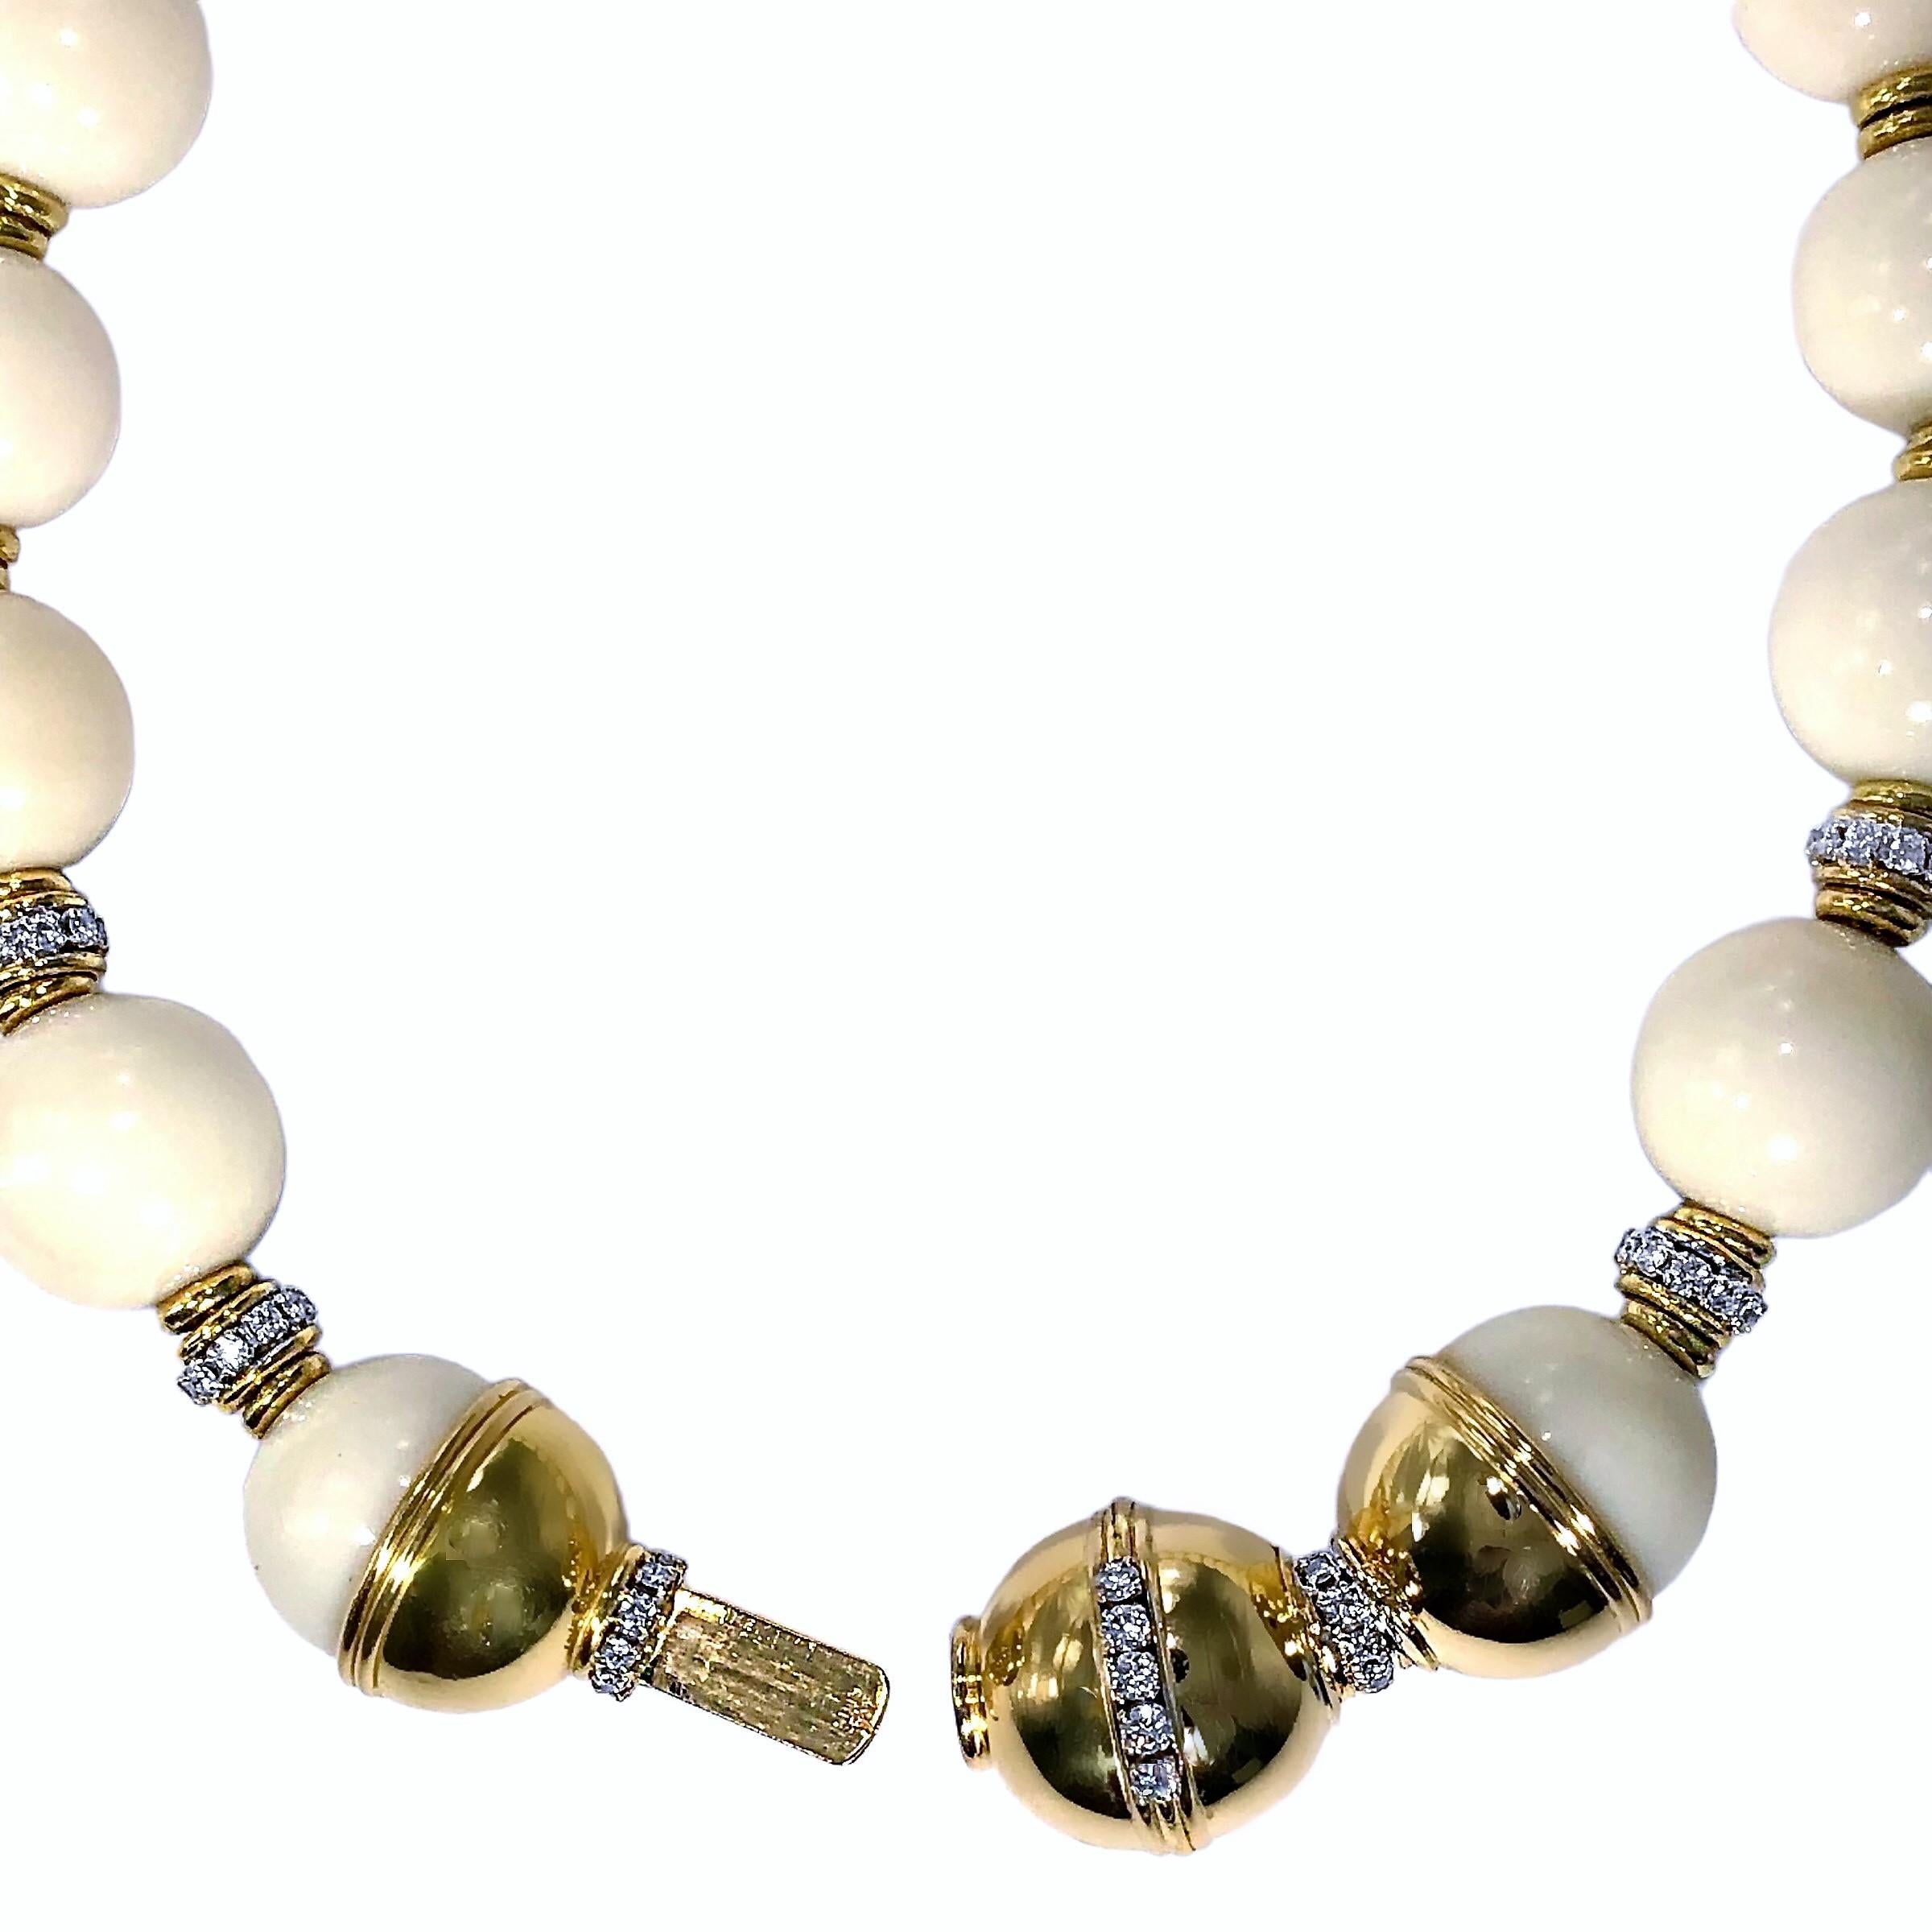 Modern Bold, 23mm White Coral Bead, 18K Yellow Gold & Diamond Necklace by Emis Beros